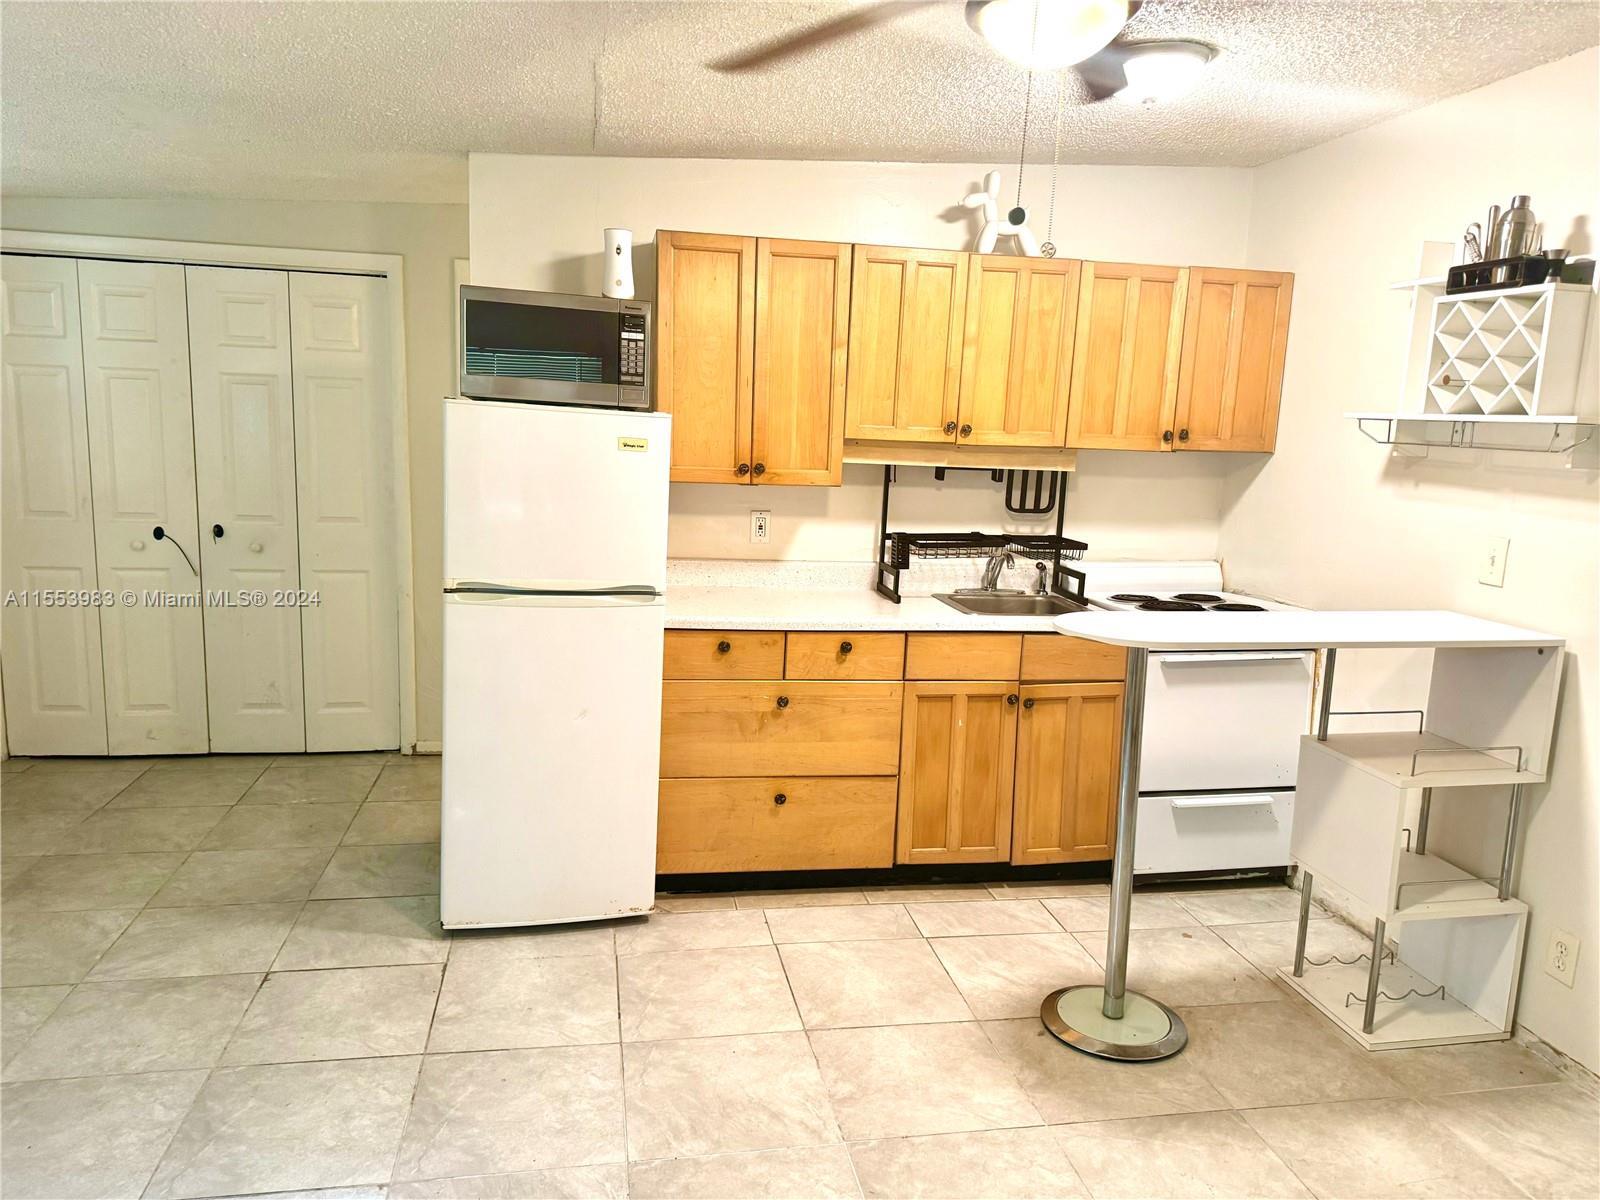 Photo of 1701 SW 25th St #5 in Fort Lauderdale, FL